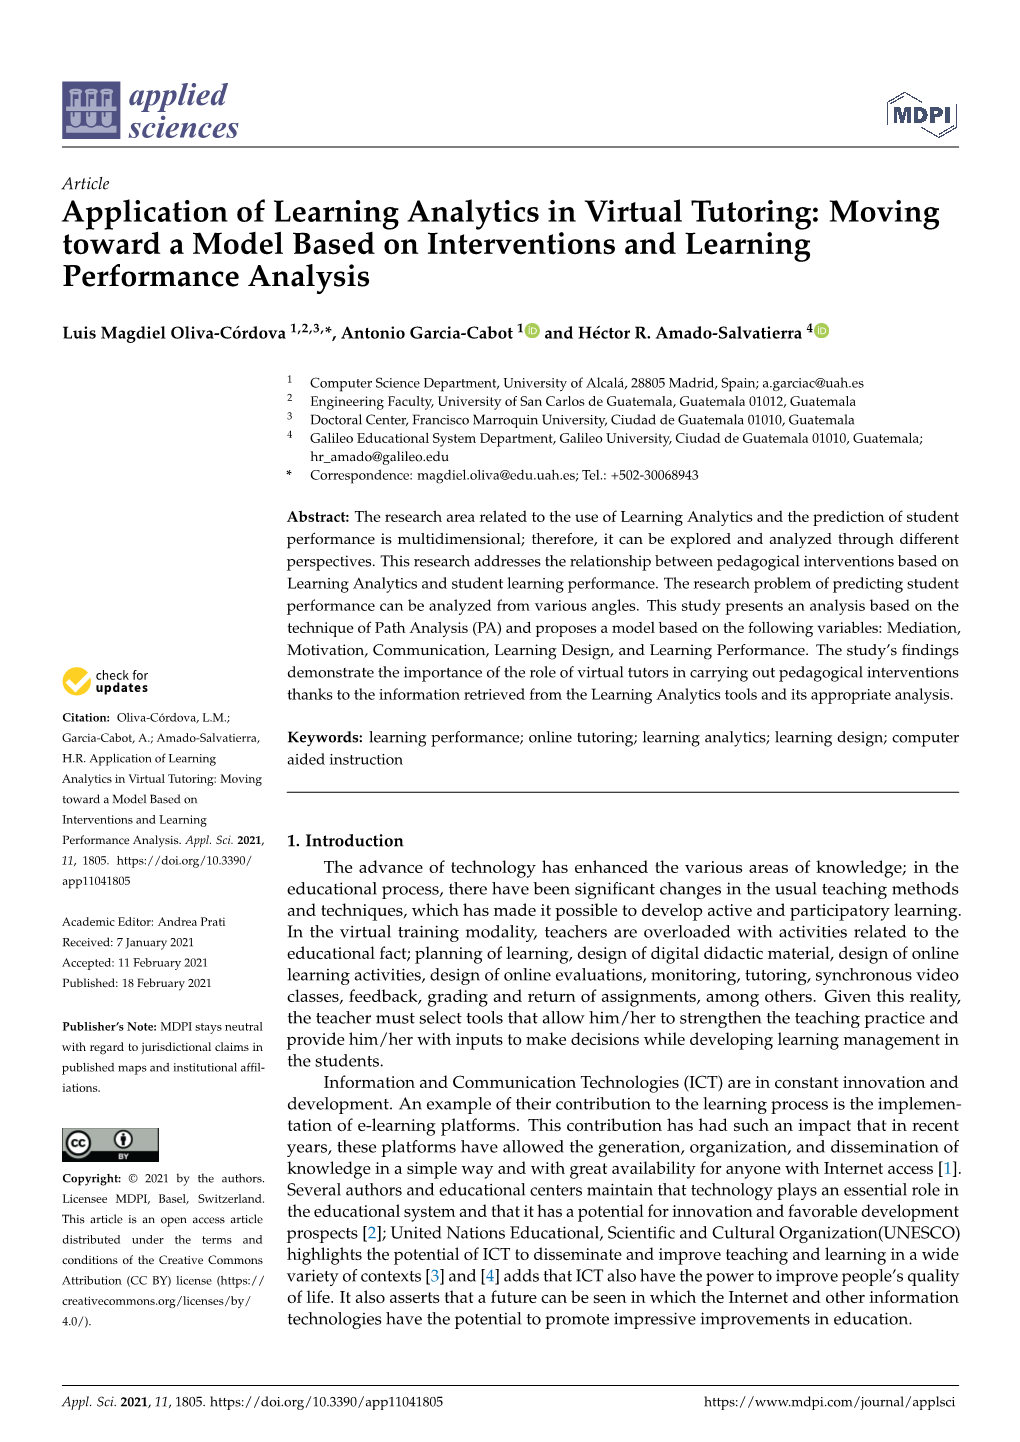 Application of Learning Analytics in Virtual Tutoring: Moving Toward a Model Based on Interventions and Learning Performance Analysis